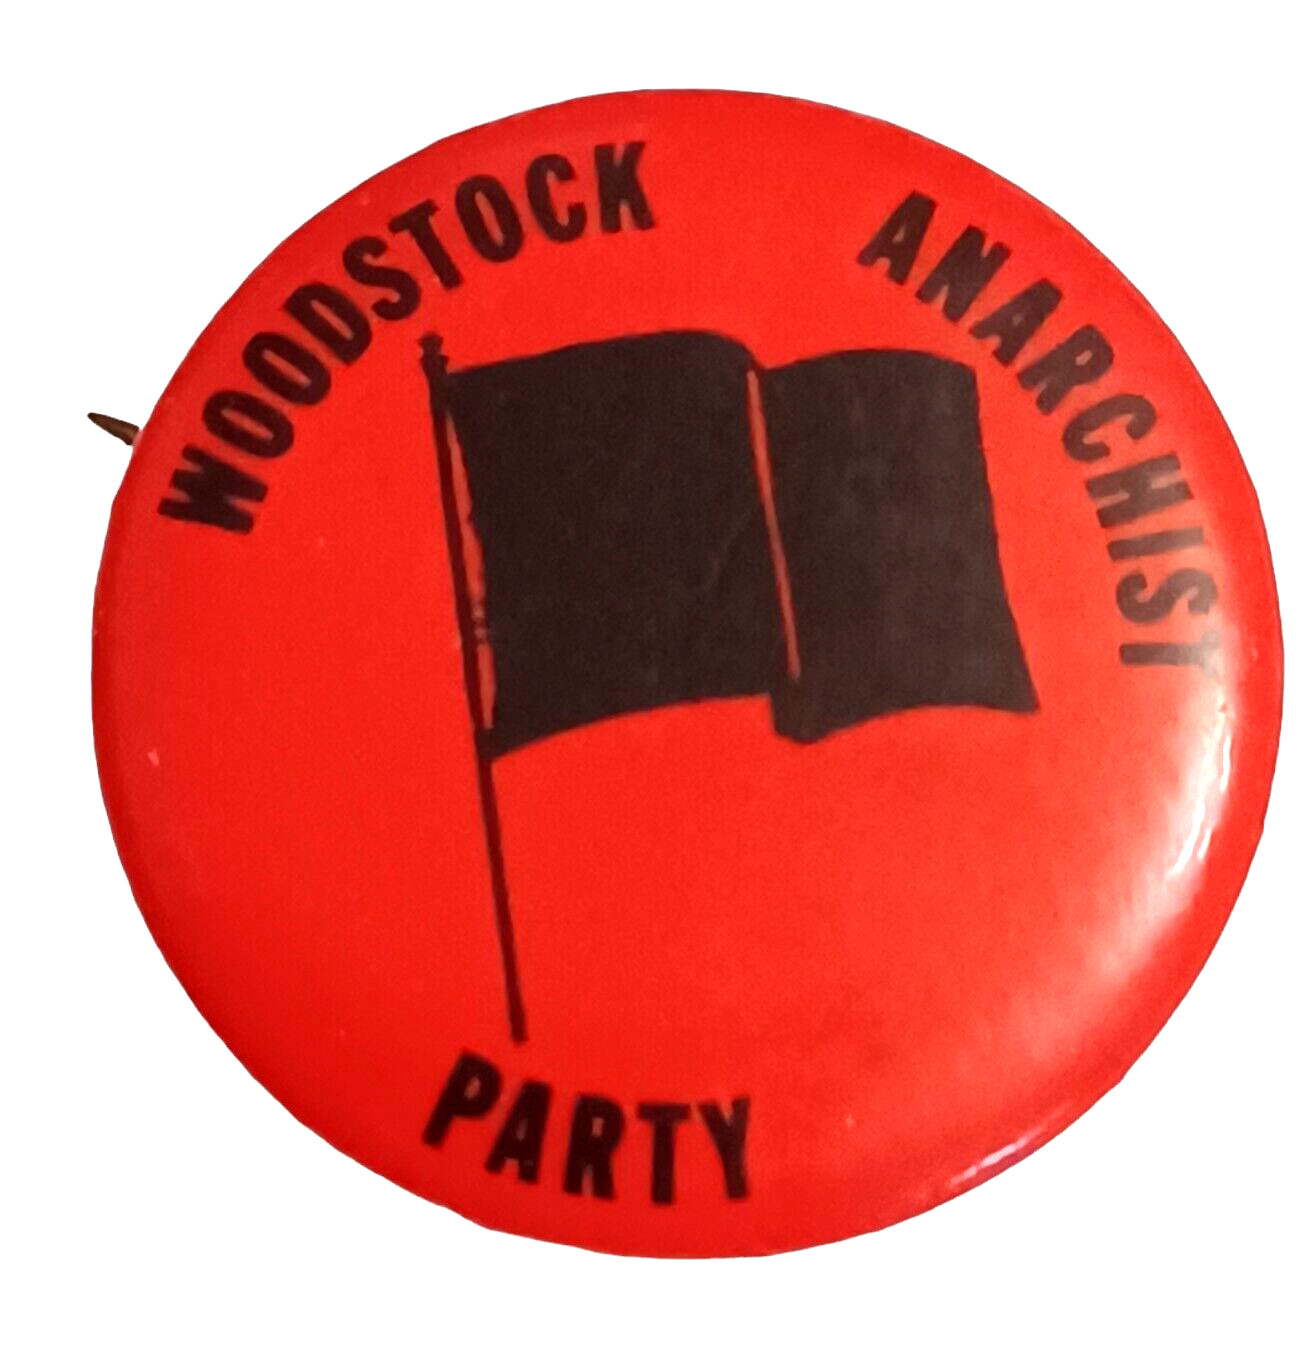 1970s Woodstock Anarchist Party PInback Protest Counter Hippy Black Flag Pinback